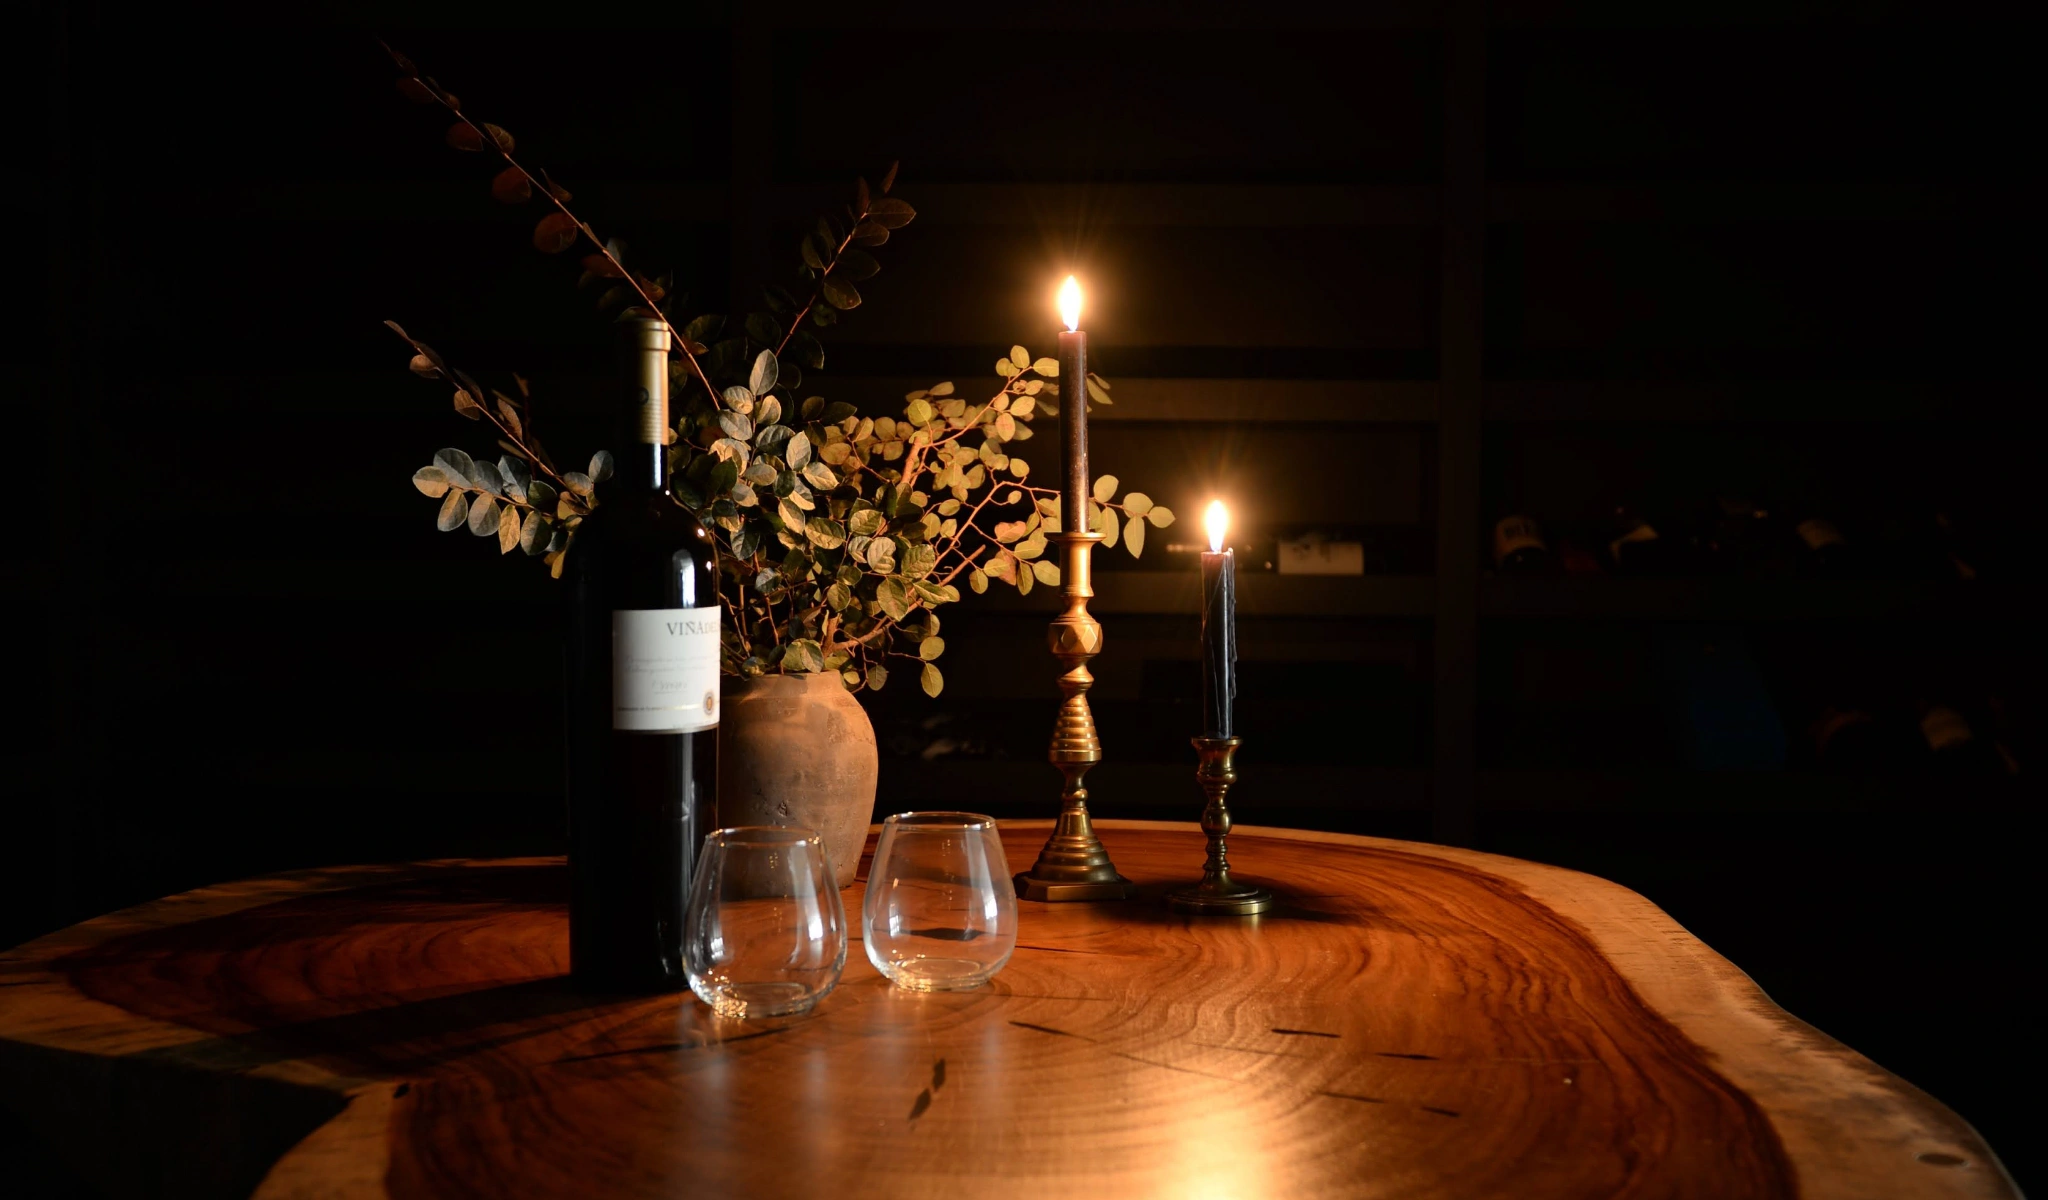 A bottle of wine and a glass of wine on a wooden table, perfect for home entertaining.